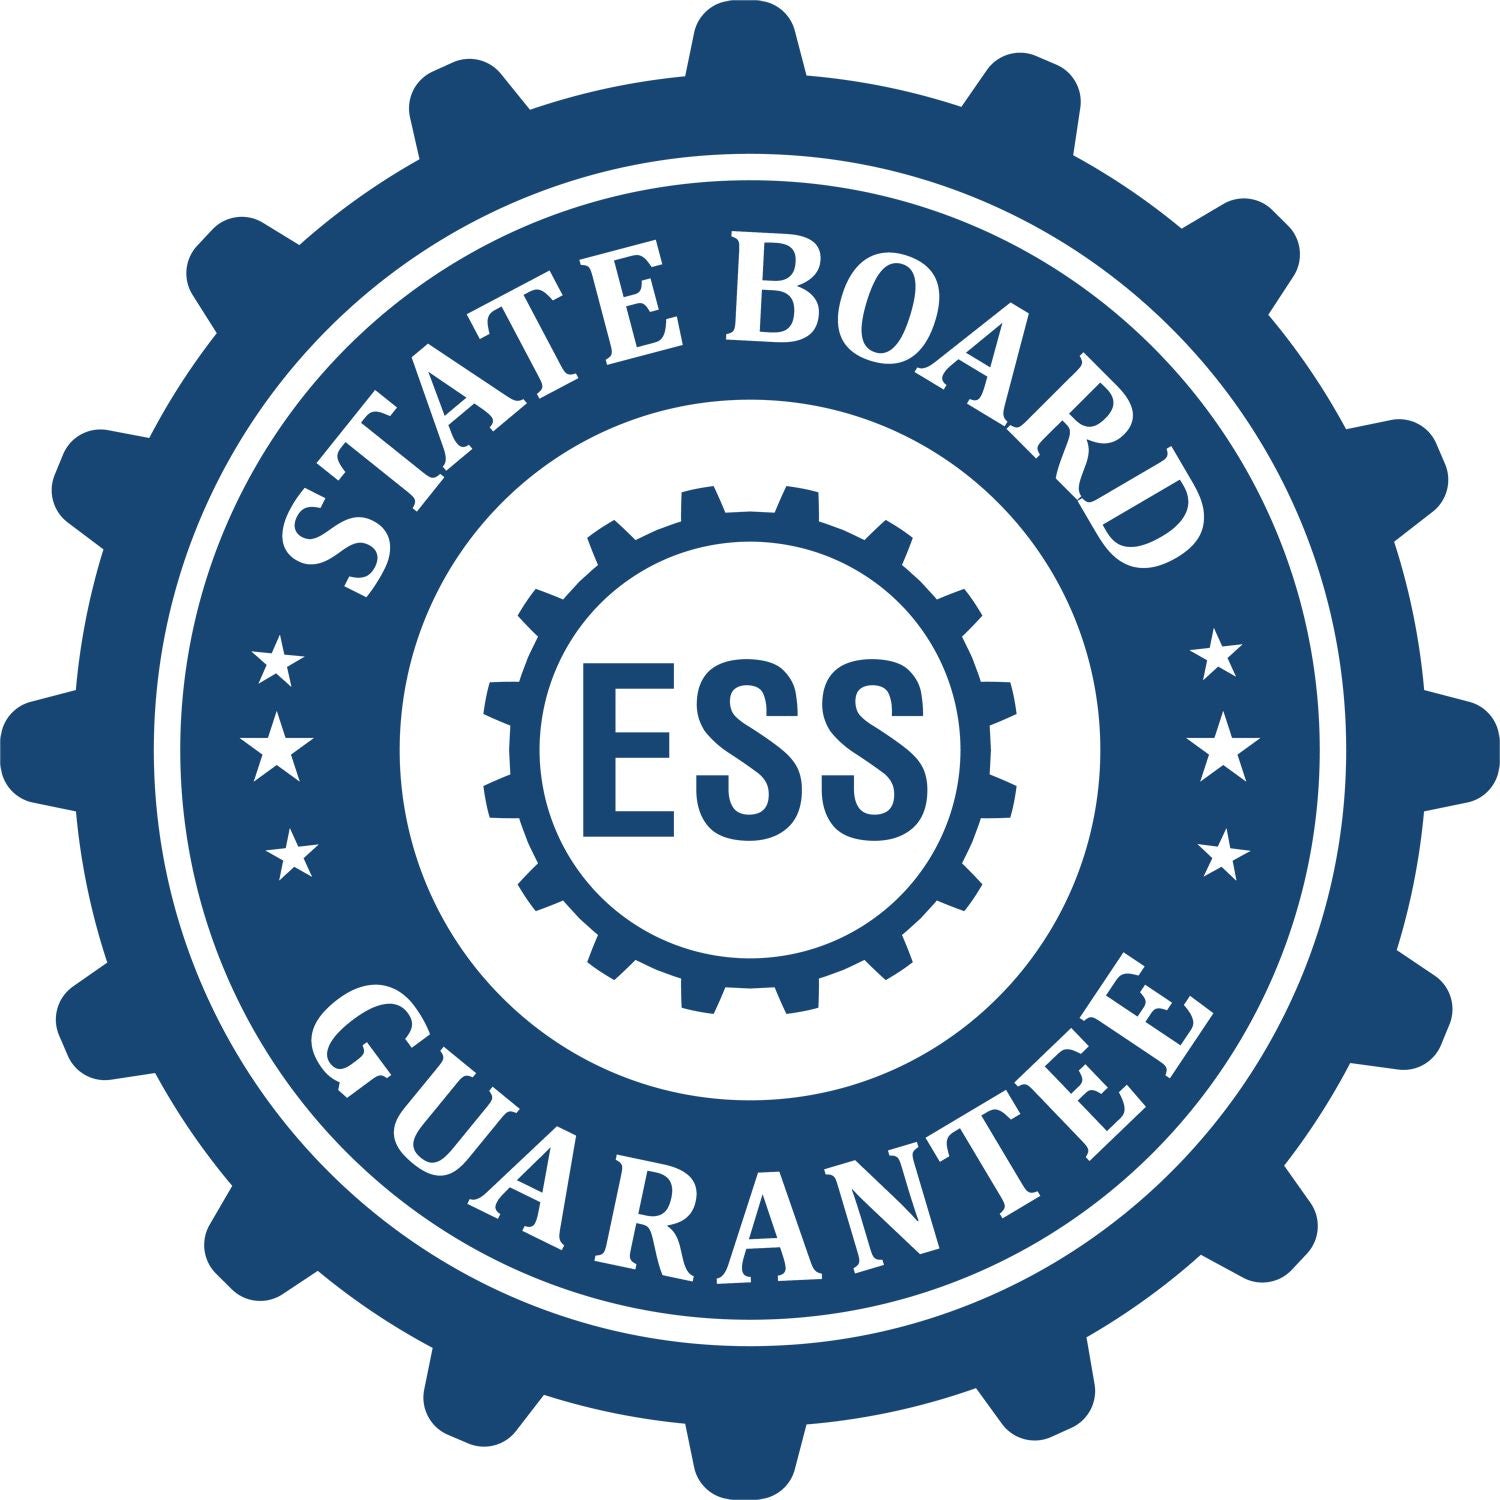 An emblem in a gear shape illustrating a state board guarantee for the Michigan Landscape Architectural Seal Stamp product.